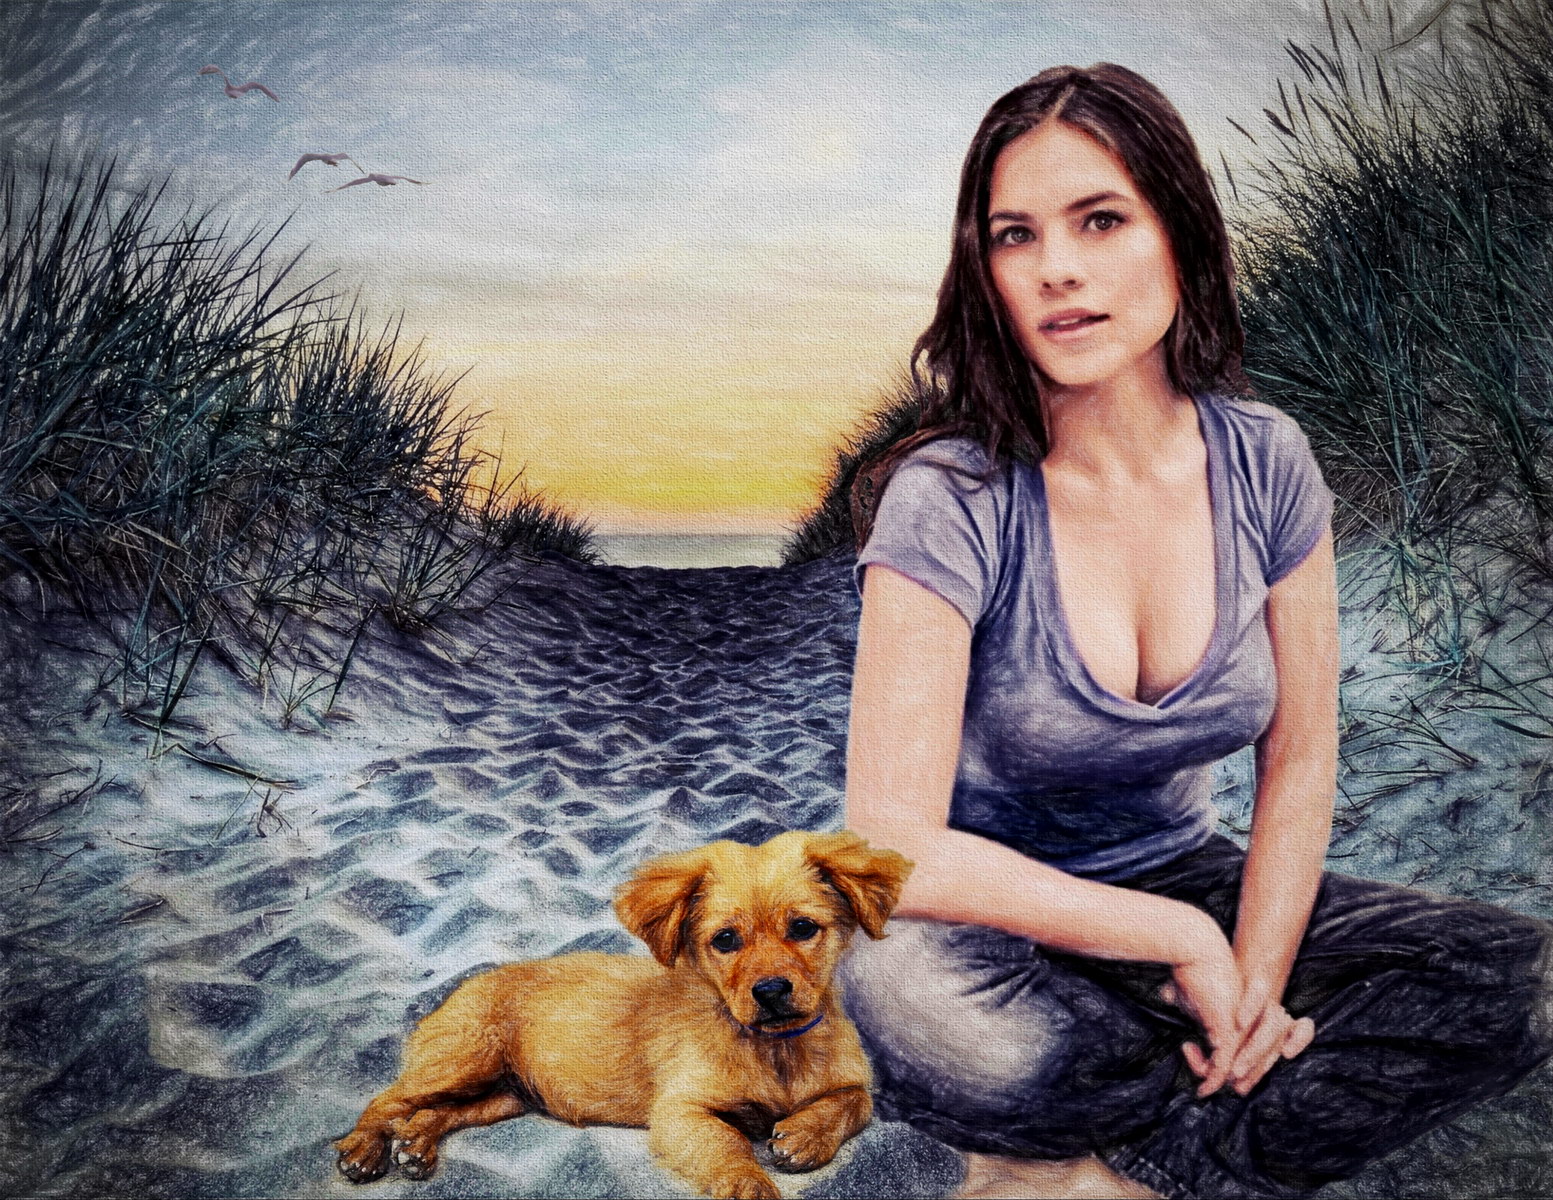 Hayley Atwell Dunes W Dog And Seagulls Small - Hayley Atwell Dog - HD Wallpaper 